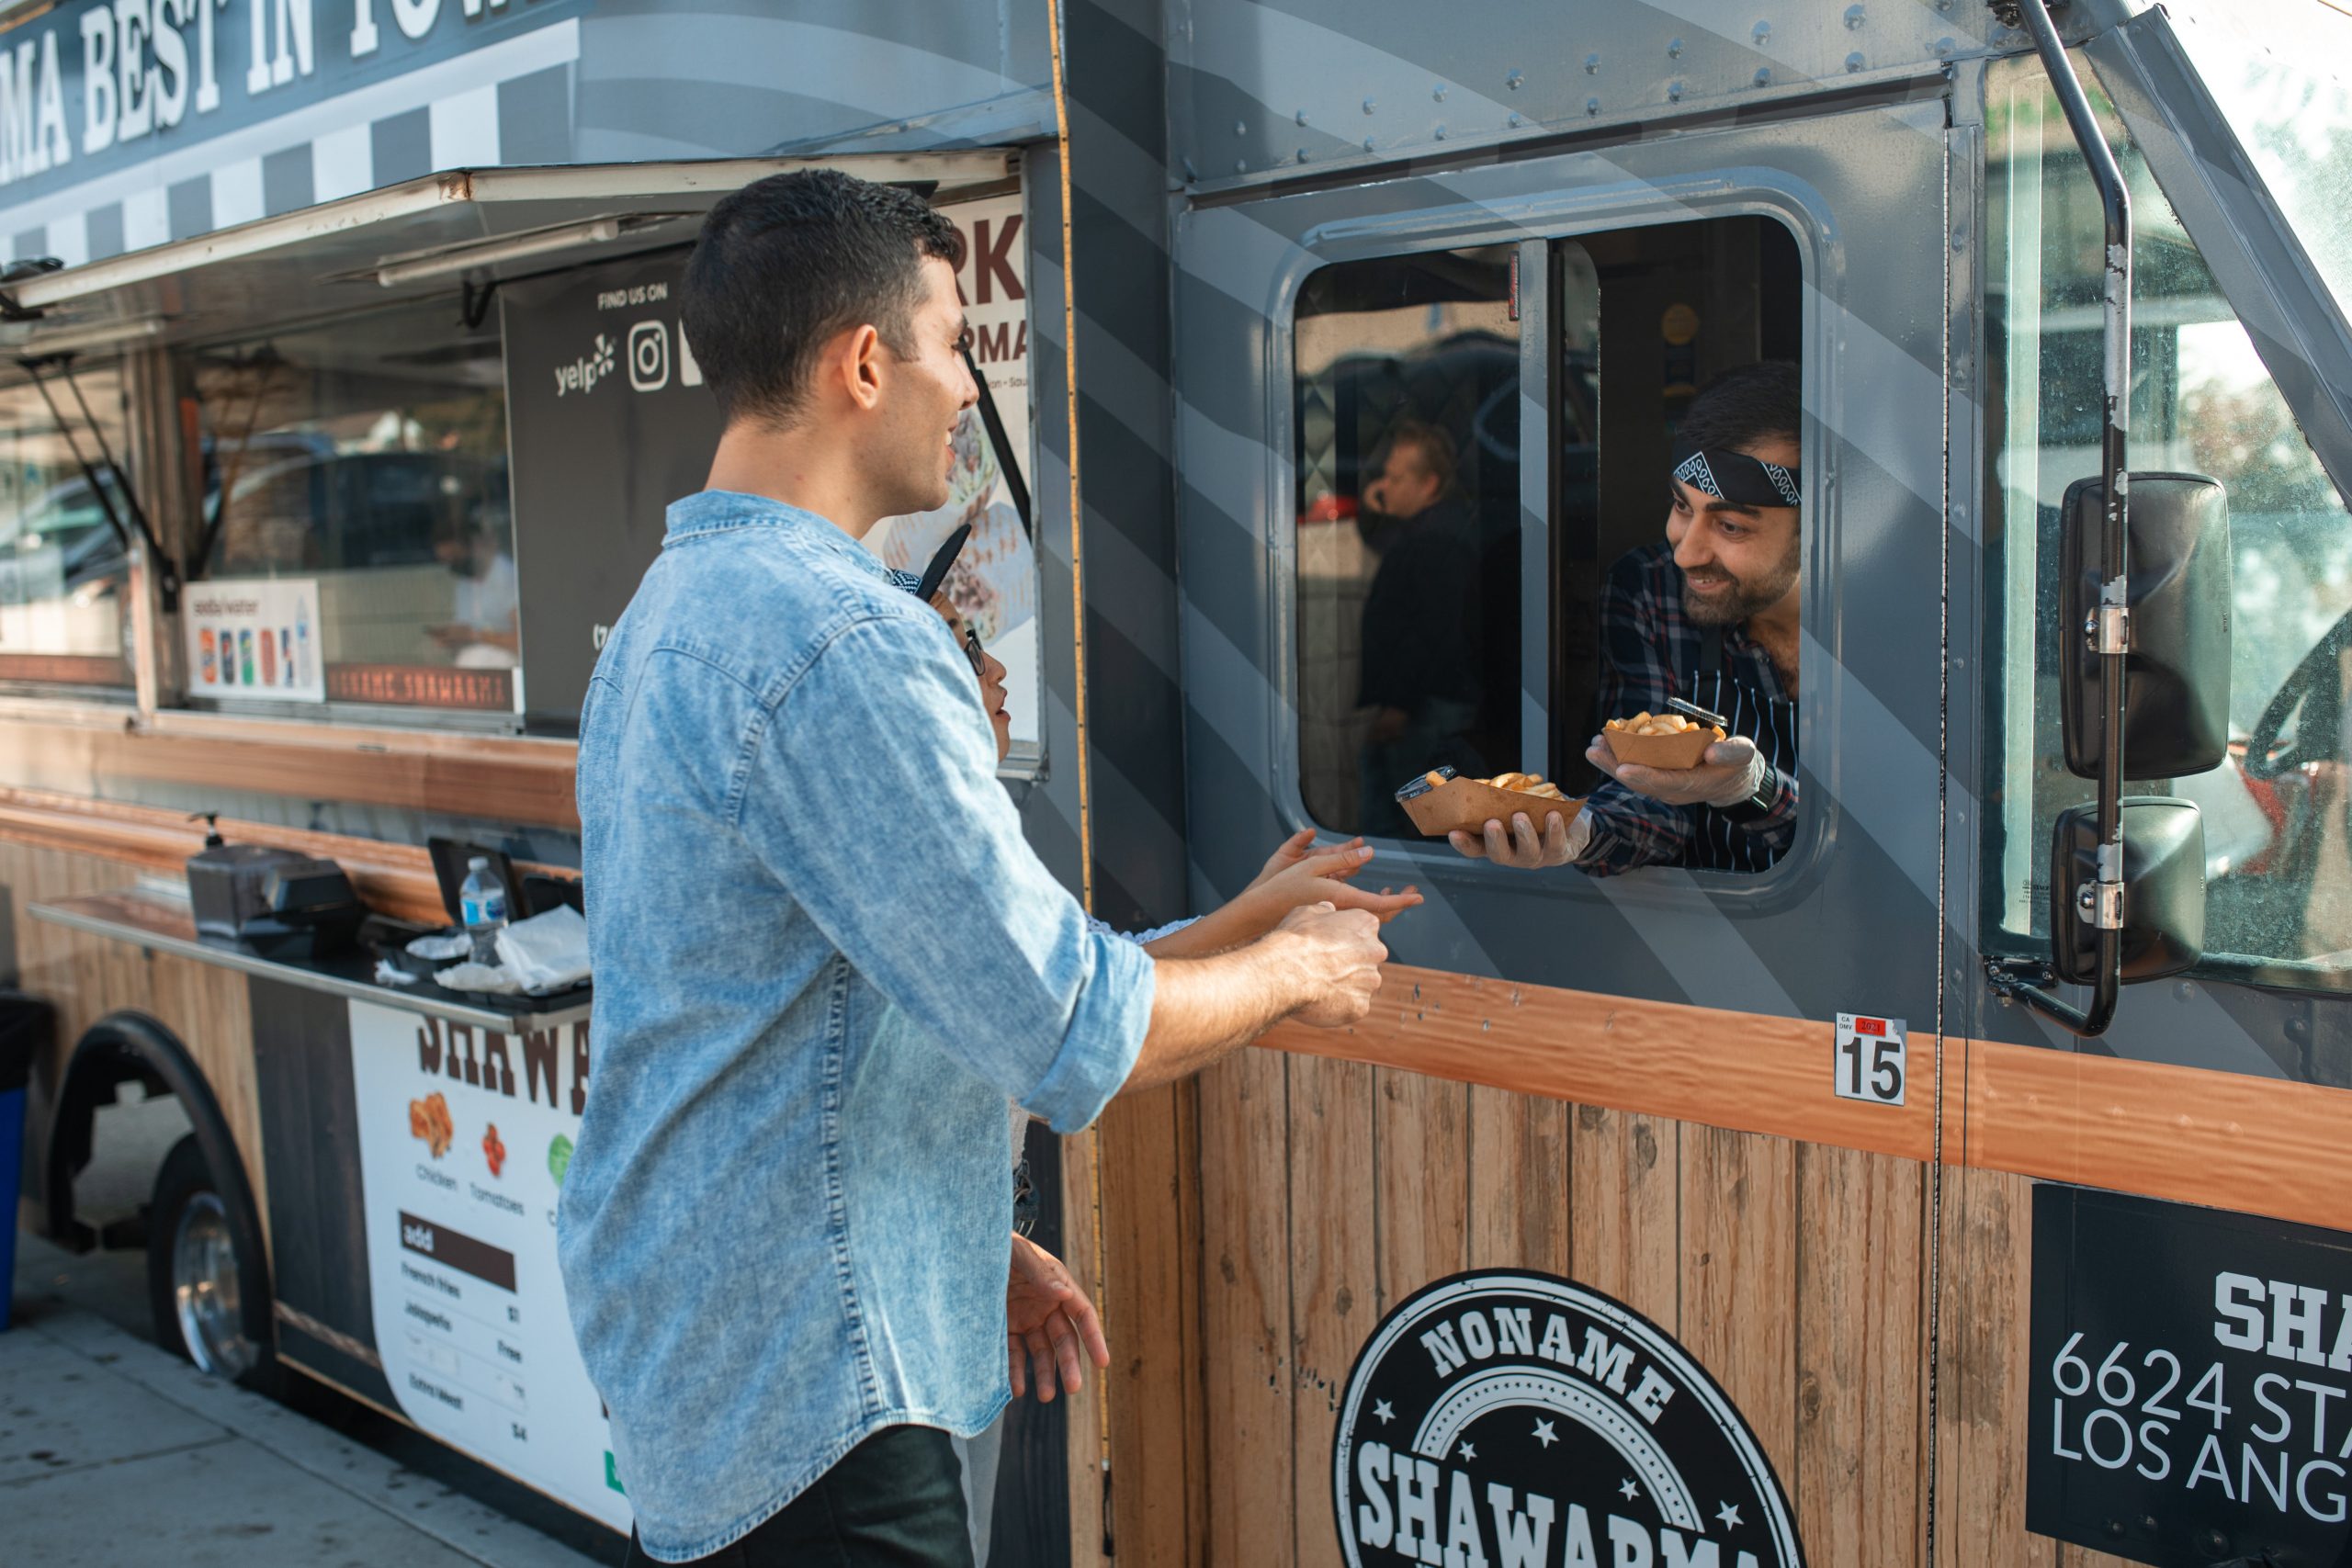 Man receiving orders from a Vendor on a Food Truck